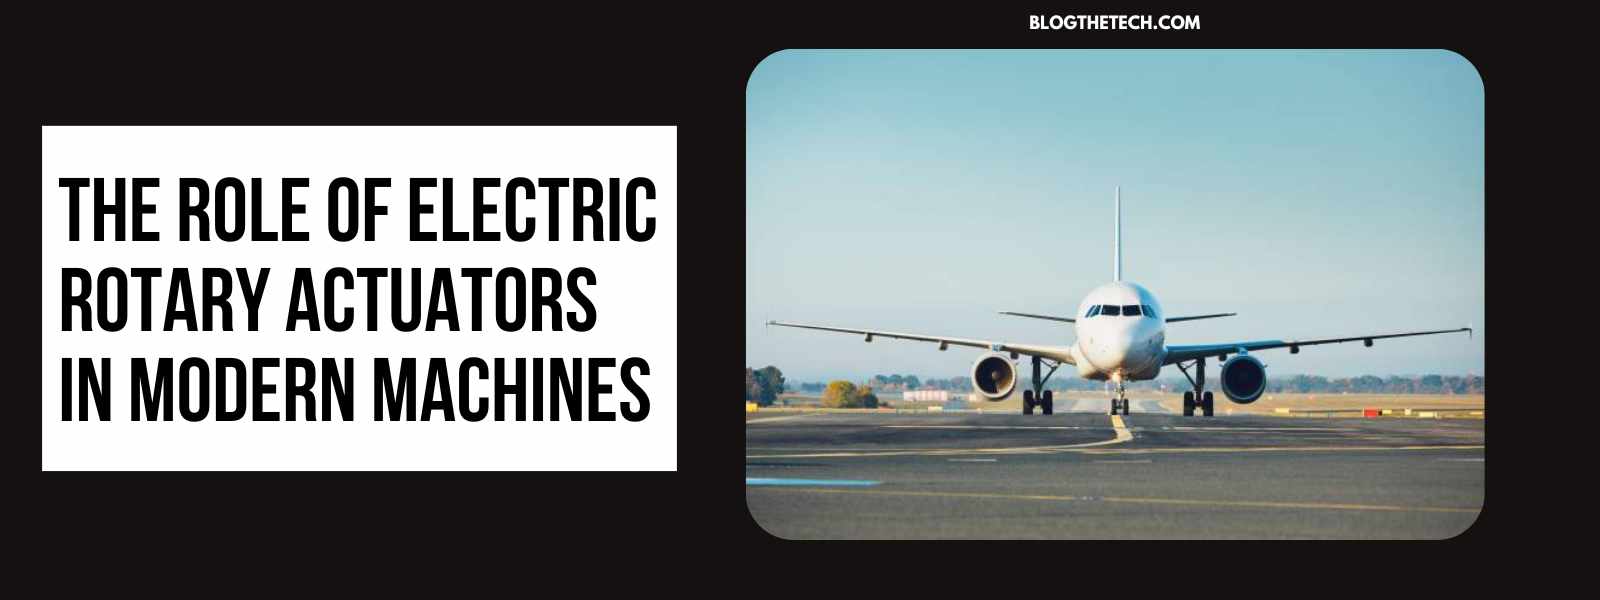 Electric Rotary Actuators in Modern Machines